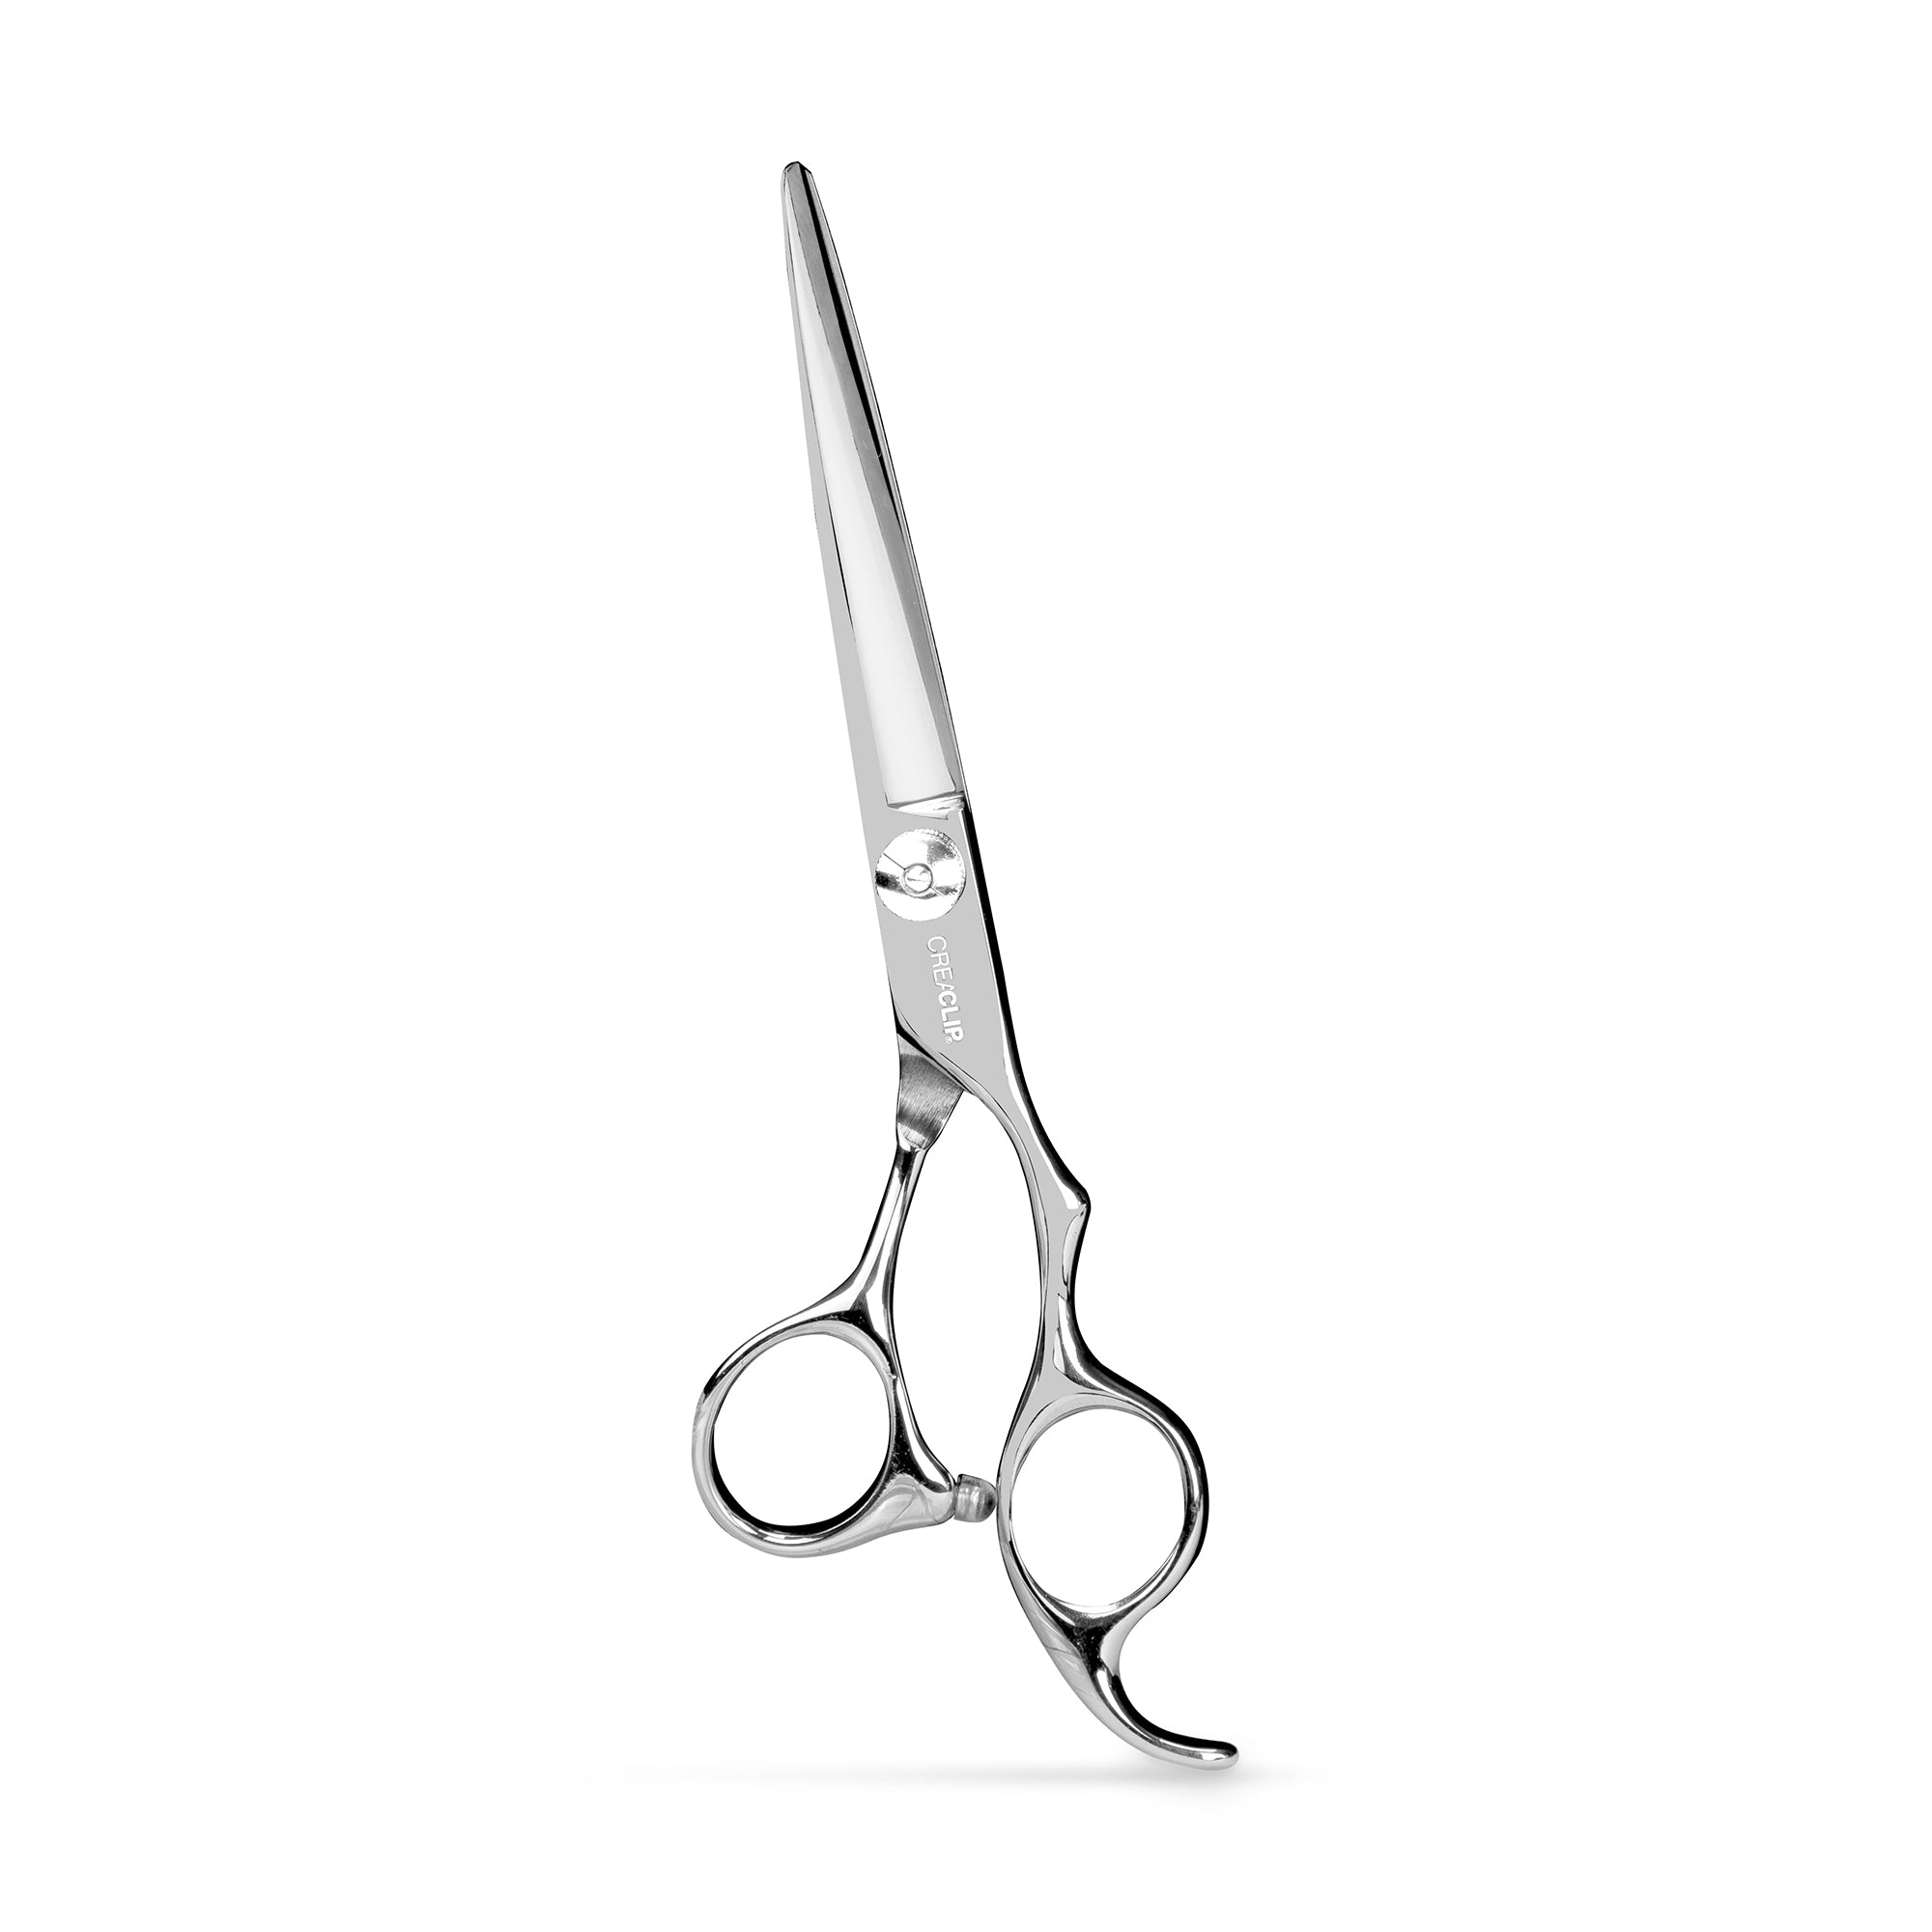 How to hold hairdressing scissors like a professional - Scissor Tech UK